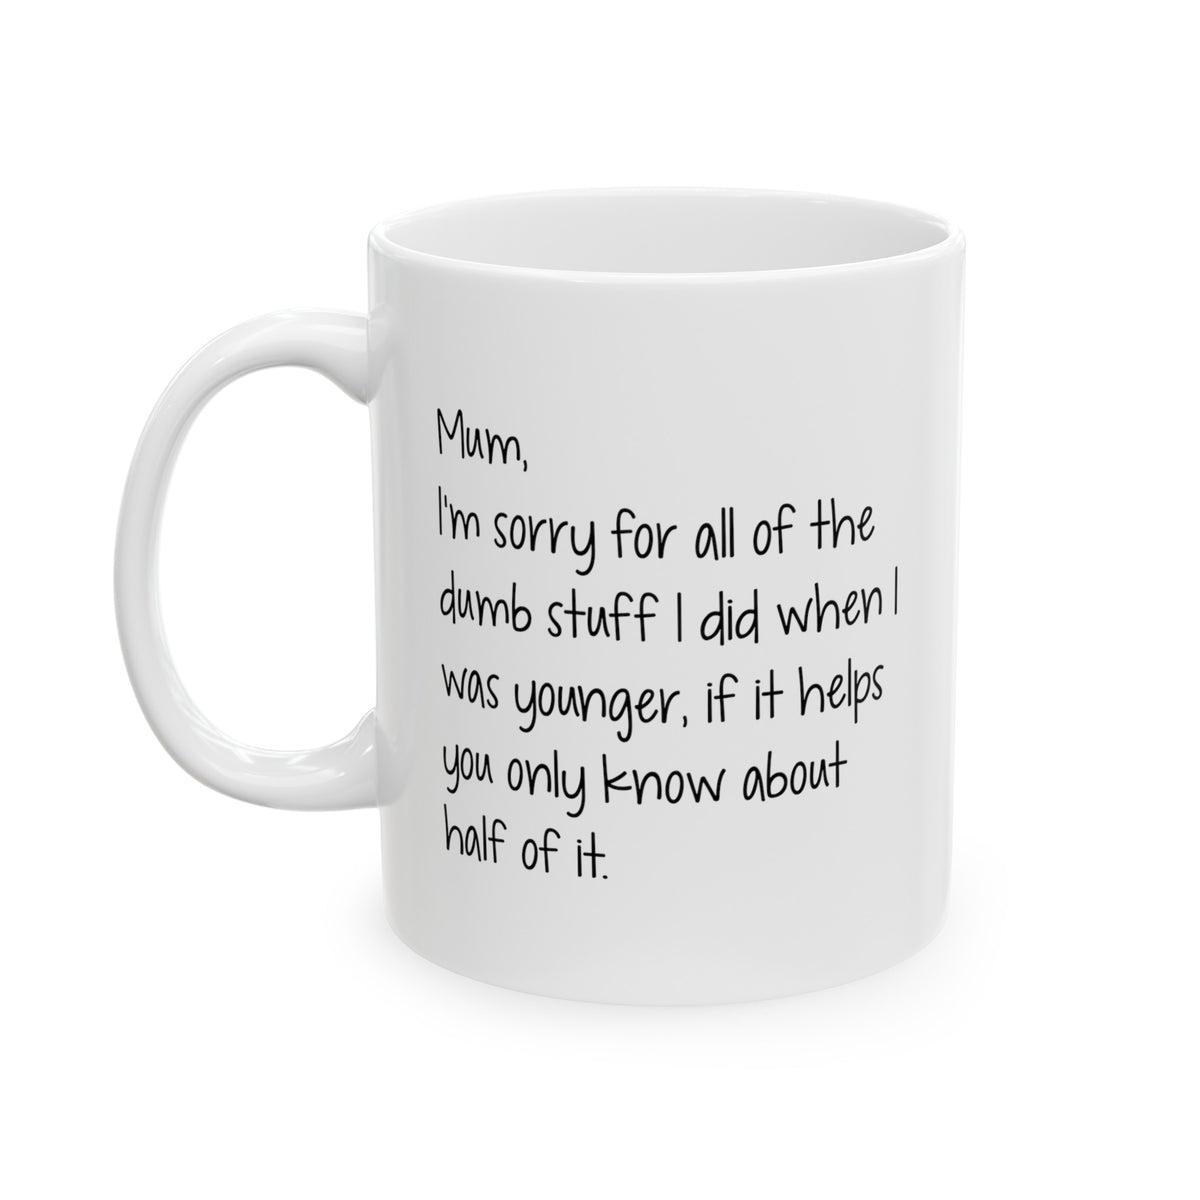 Funny Mother’s Day Gifts Coffee Mug For Mom - Mum, I'm sorry for all of the dumb stuff i did when I was younger - Best Birthday Gift From Daughter